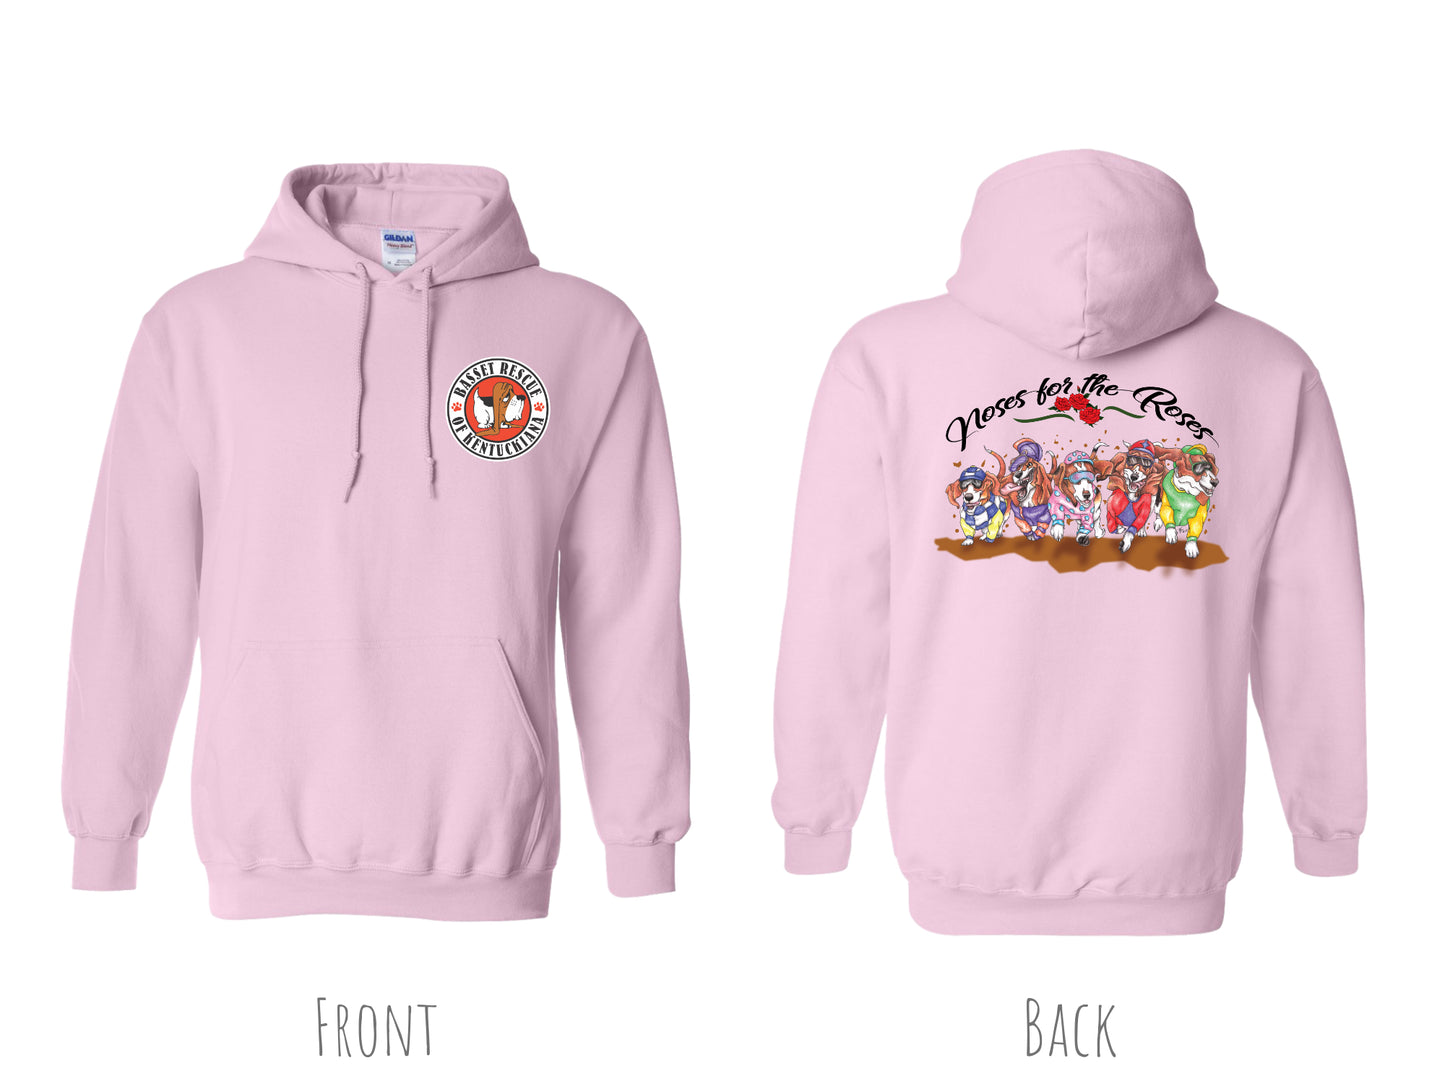 Noses for the Roses Hoodie *6 COLORS*